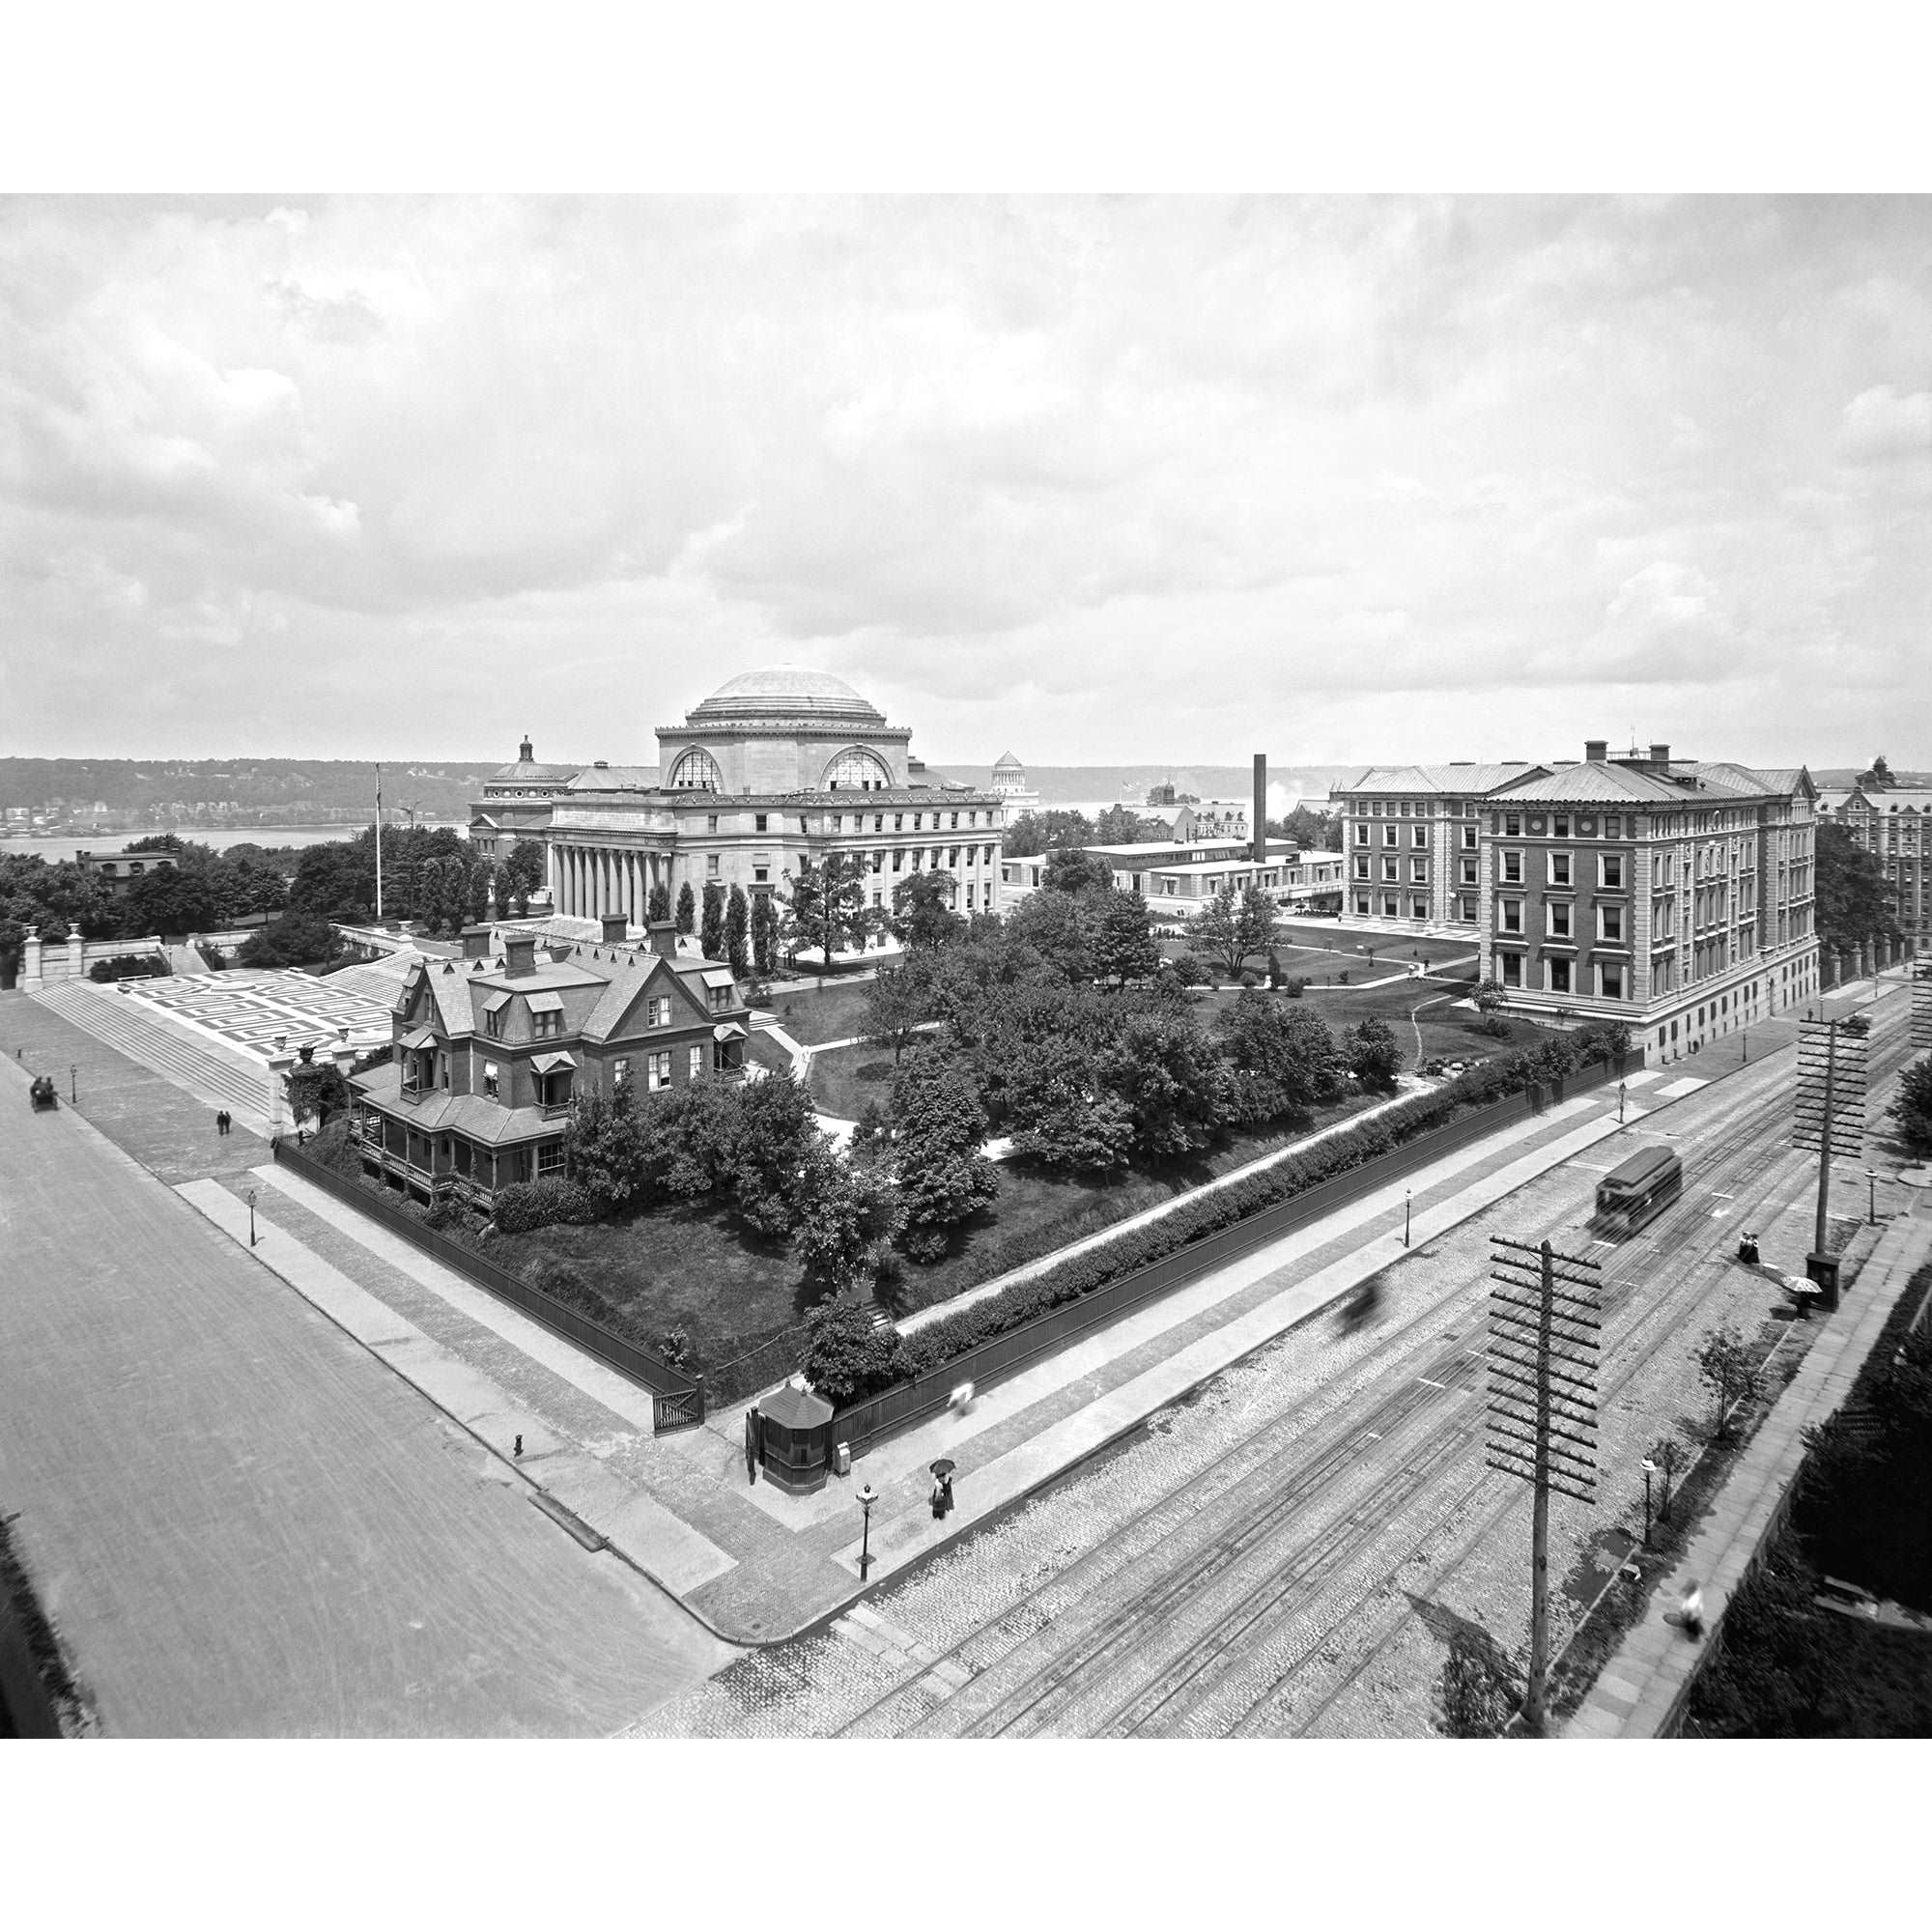 A vintage, black and white photograph of Columbia University with the Hudson River in the background